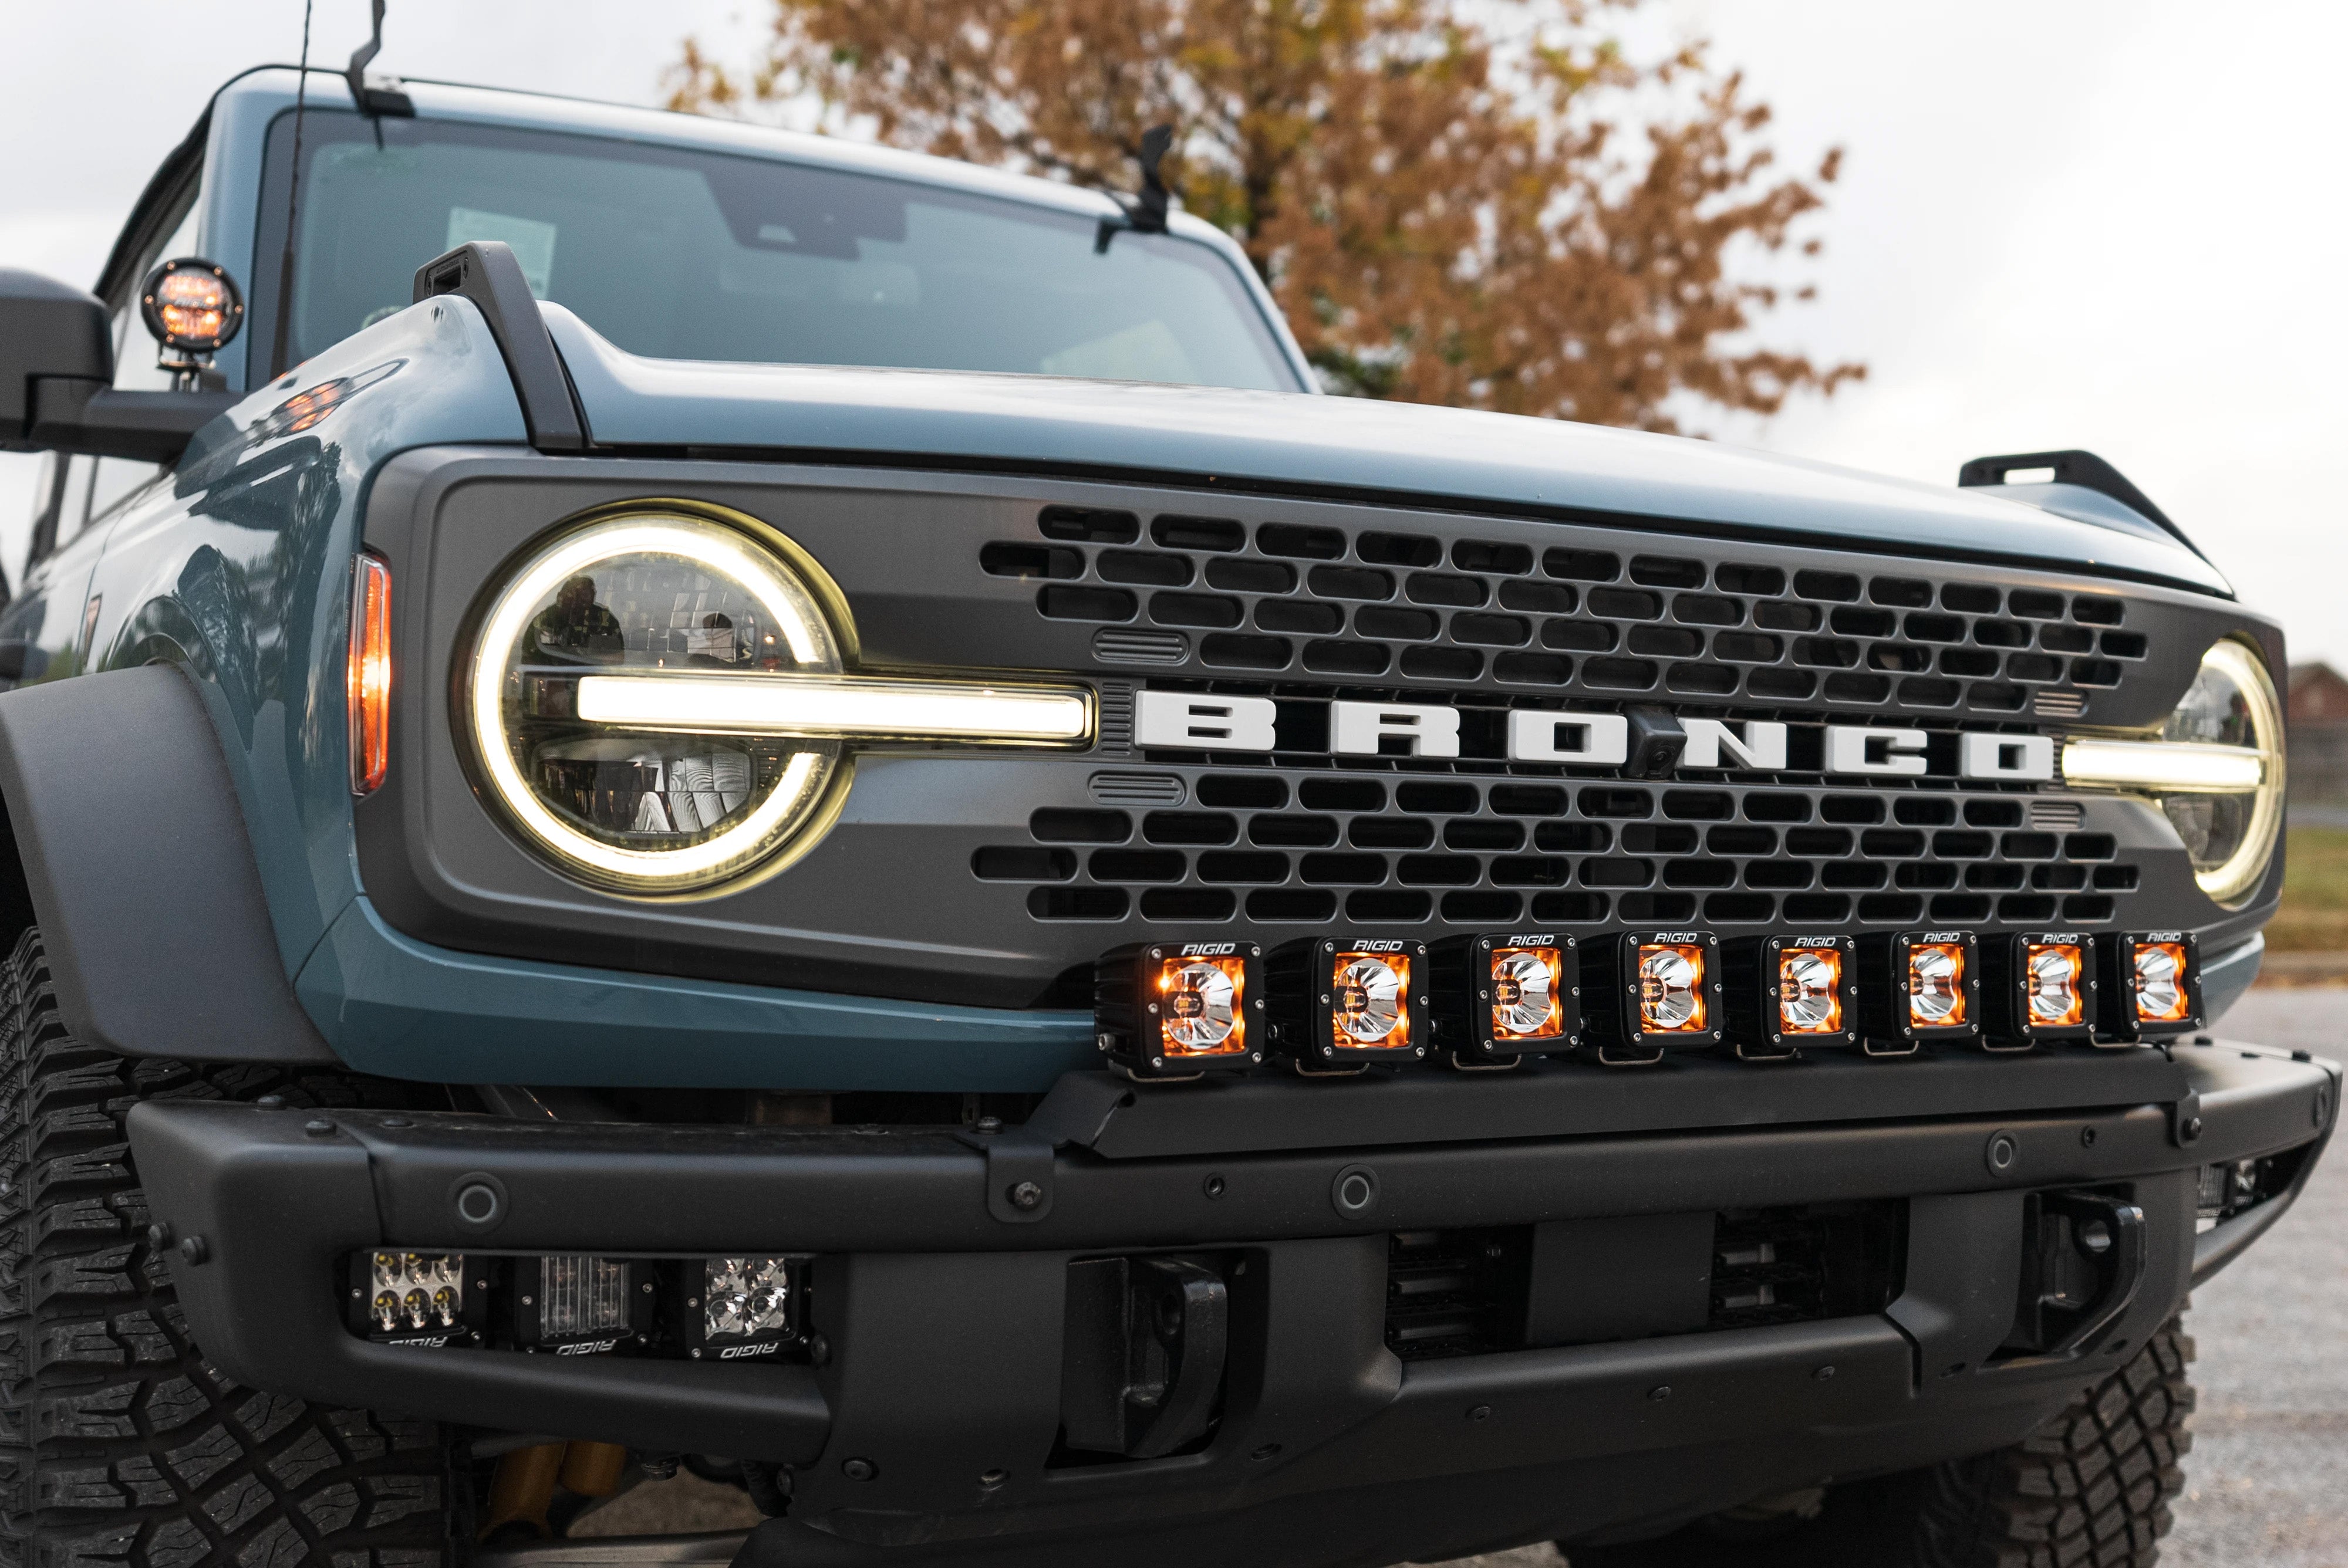 Finding the Brightest LED Light Bar: Your Essential Off-Road Guide